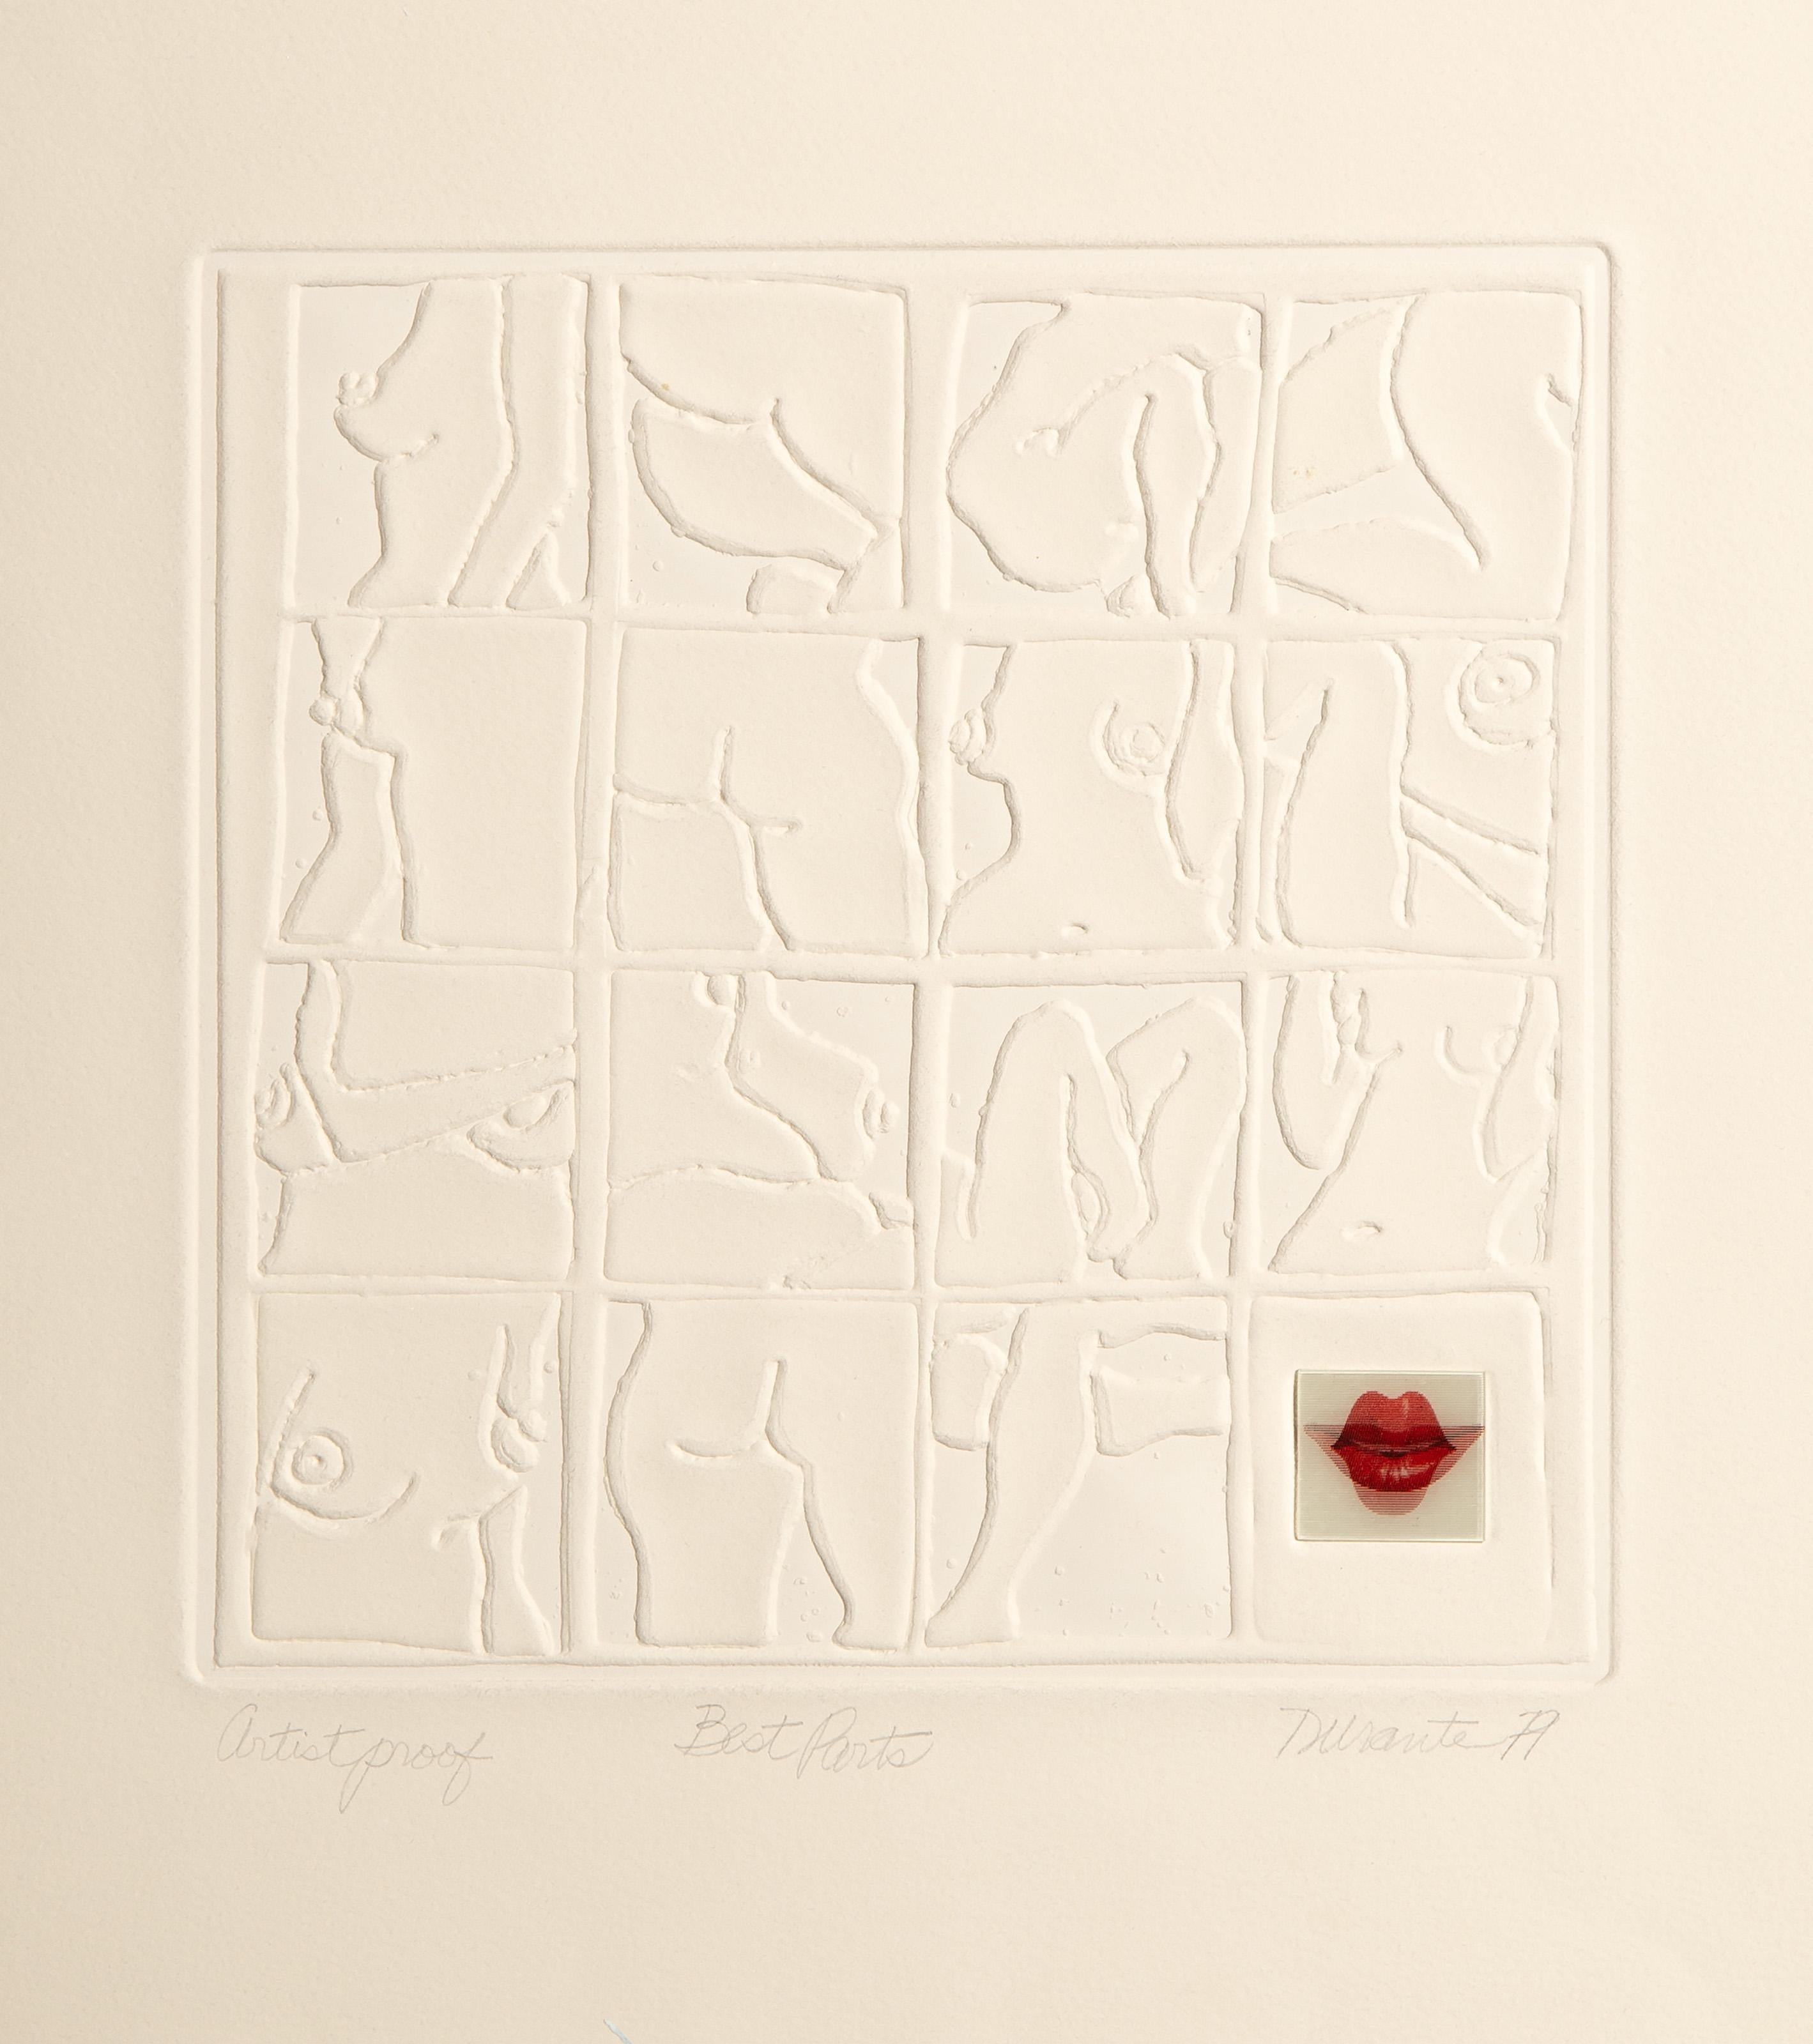 Joe Durante -  Best Parts. Year: 1979, Medium: Blind-Embossed Intaglio, signed, titled, numbered and dated in pencil, Edition: AP, Image Size: 9.5 x 9.5 inches, Size: 22 x 15 in. (55.88 x 38.1 cm) 